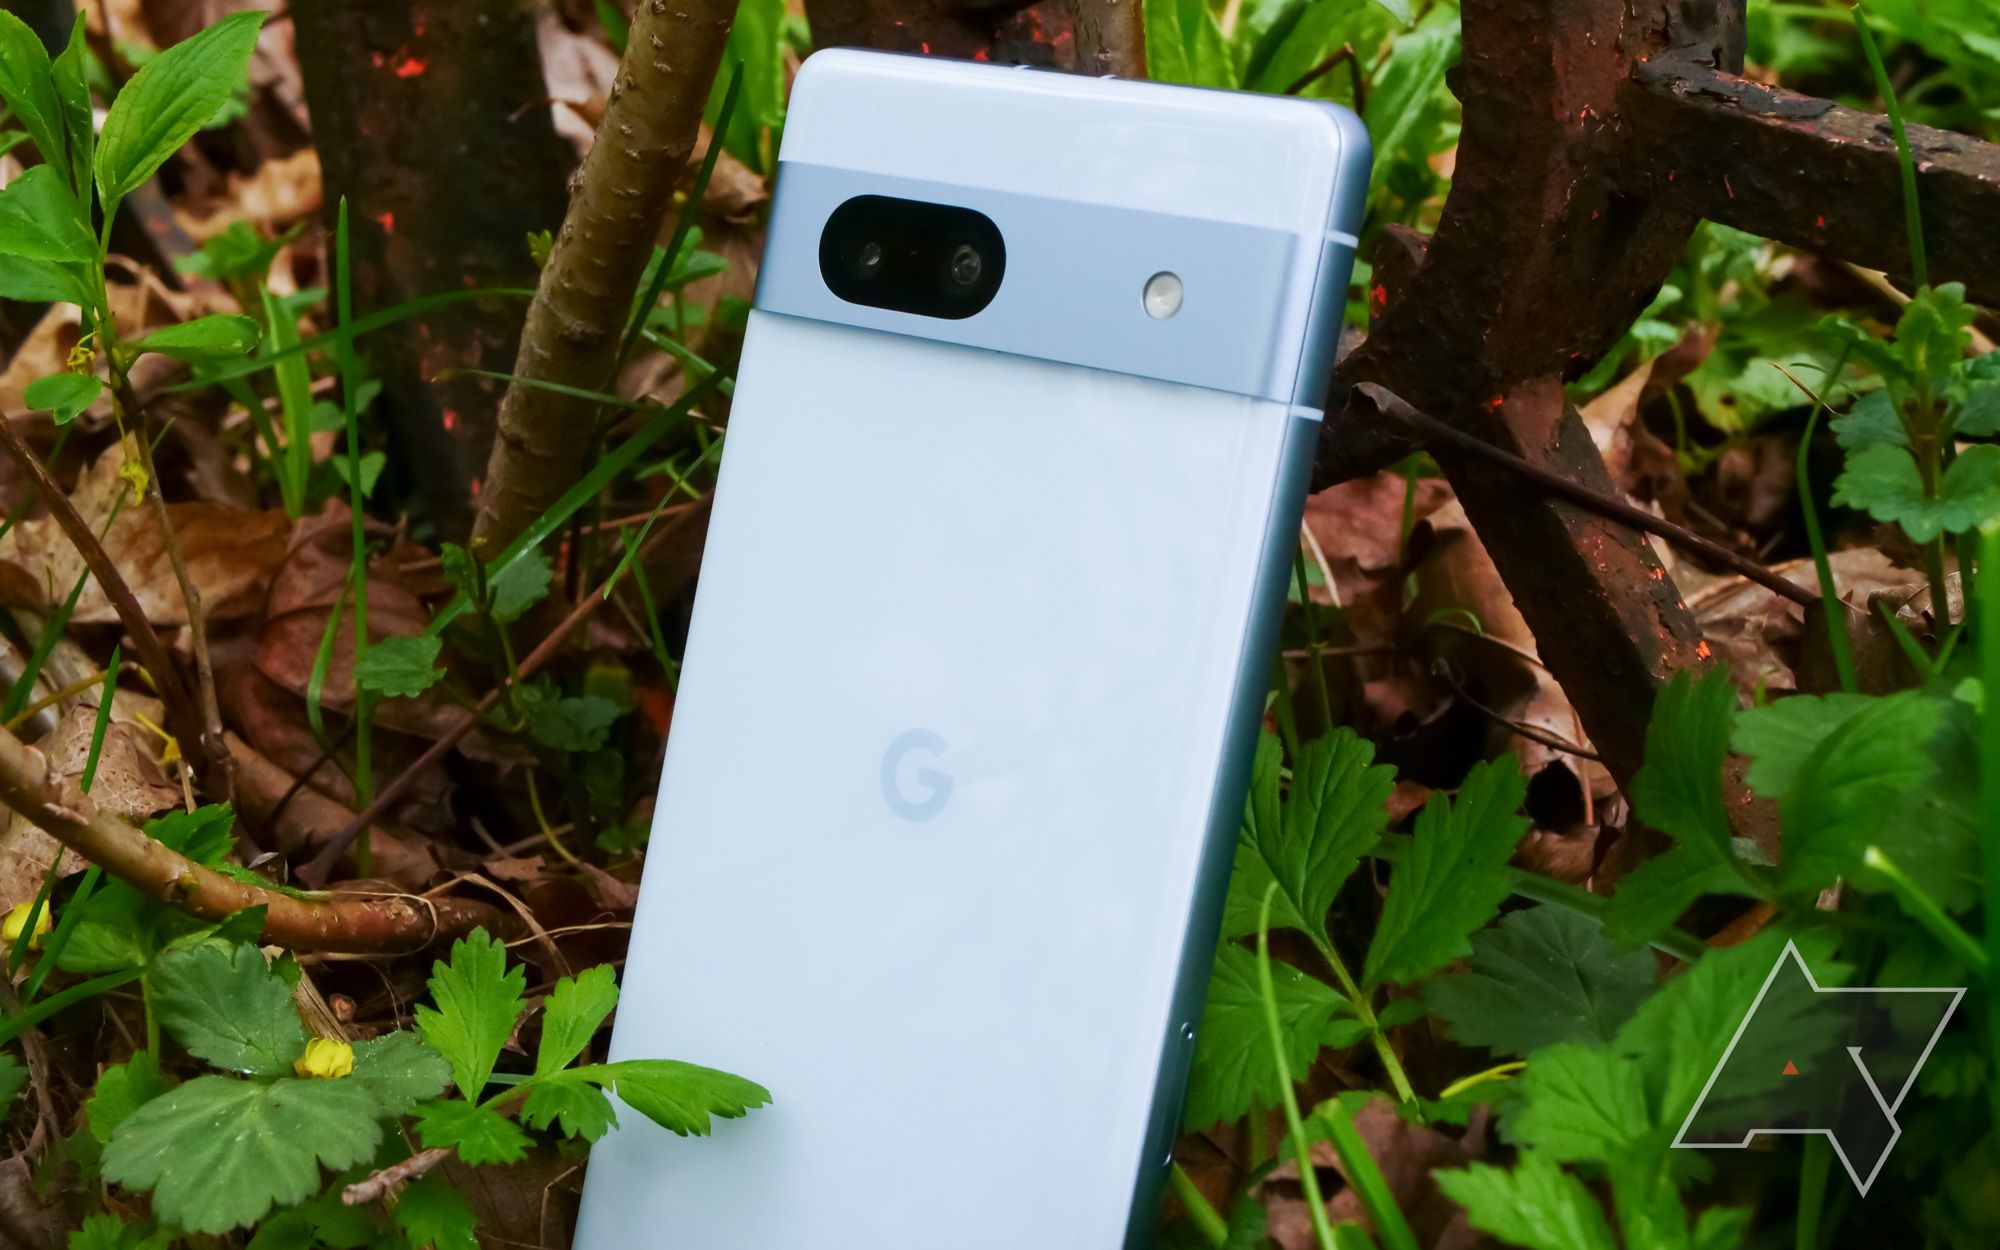 The Google Pixel 7a against green plants.